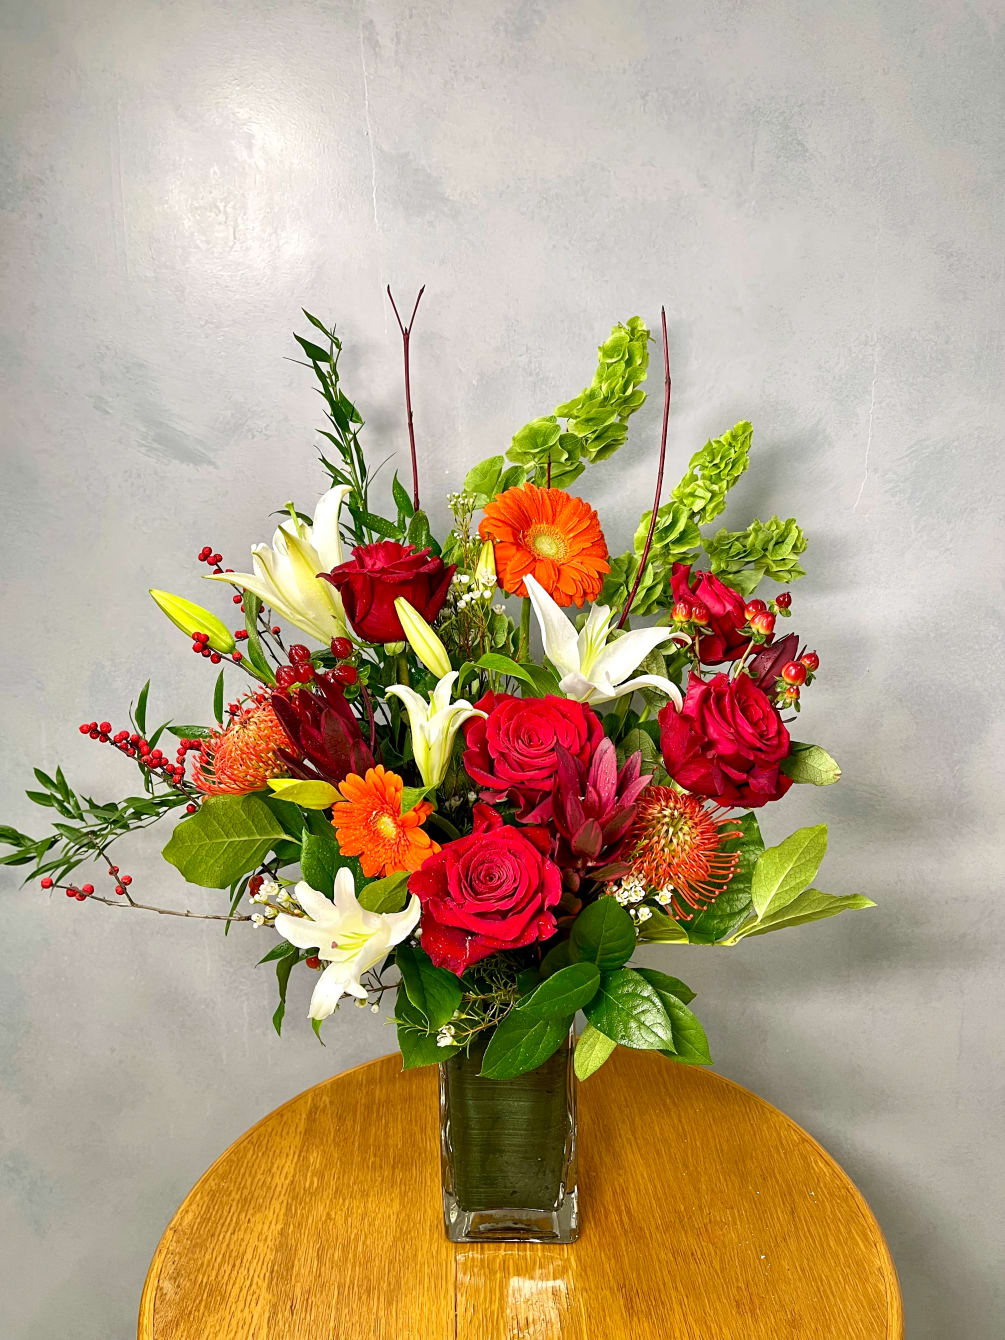 Ring in the holidays with this seasonal treasure of asiatic lilies, ginger